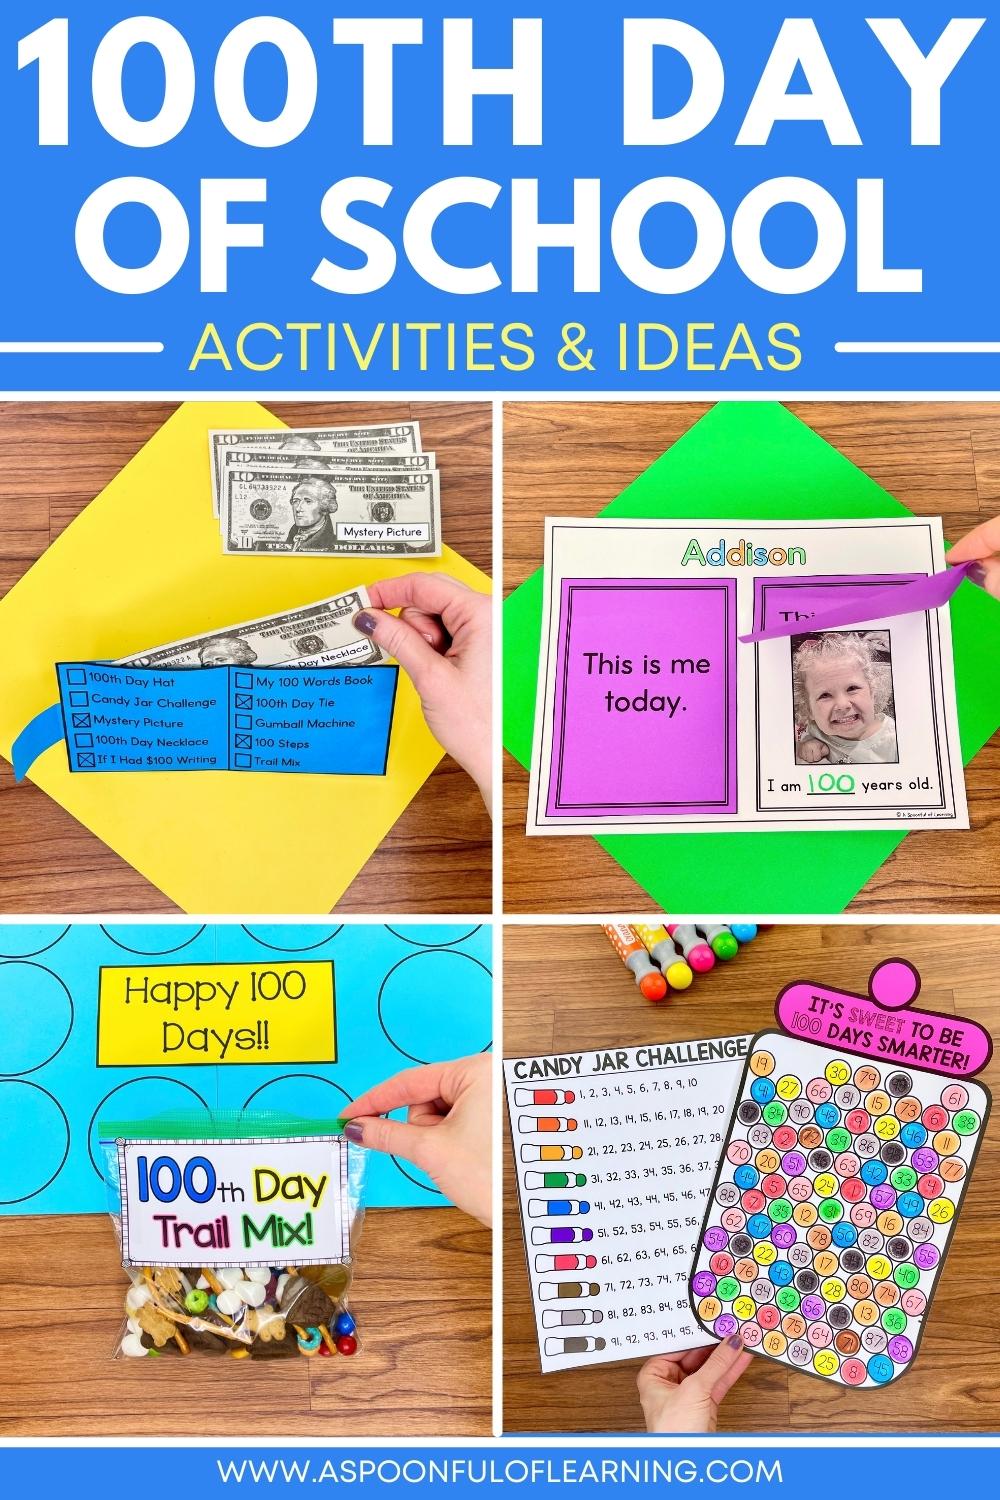 16 Ideas for 100 Days of School A Spoonful of Learning